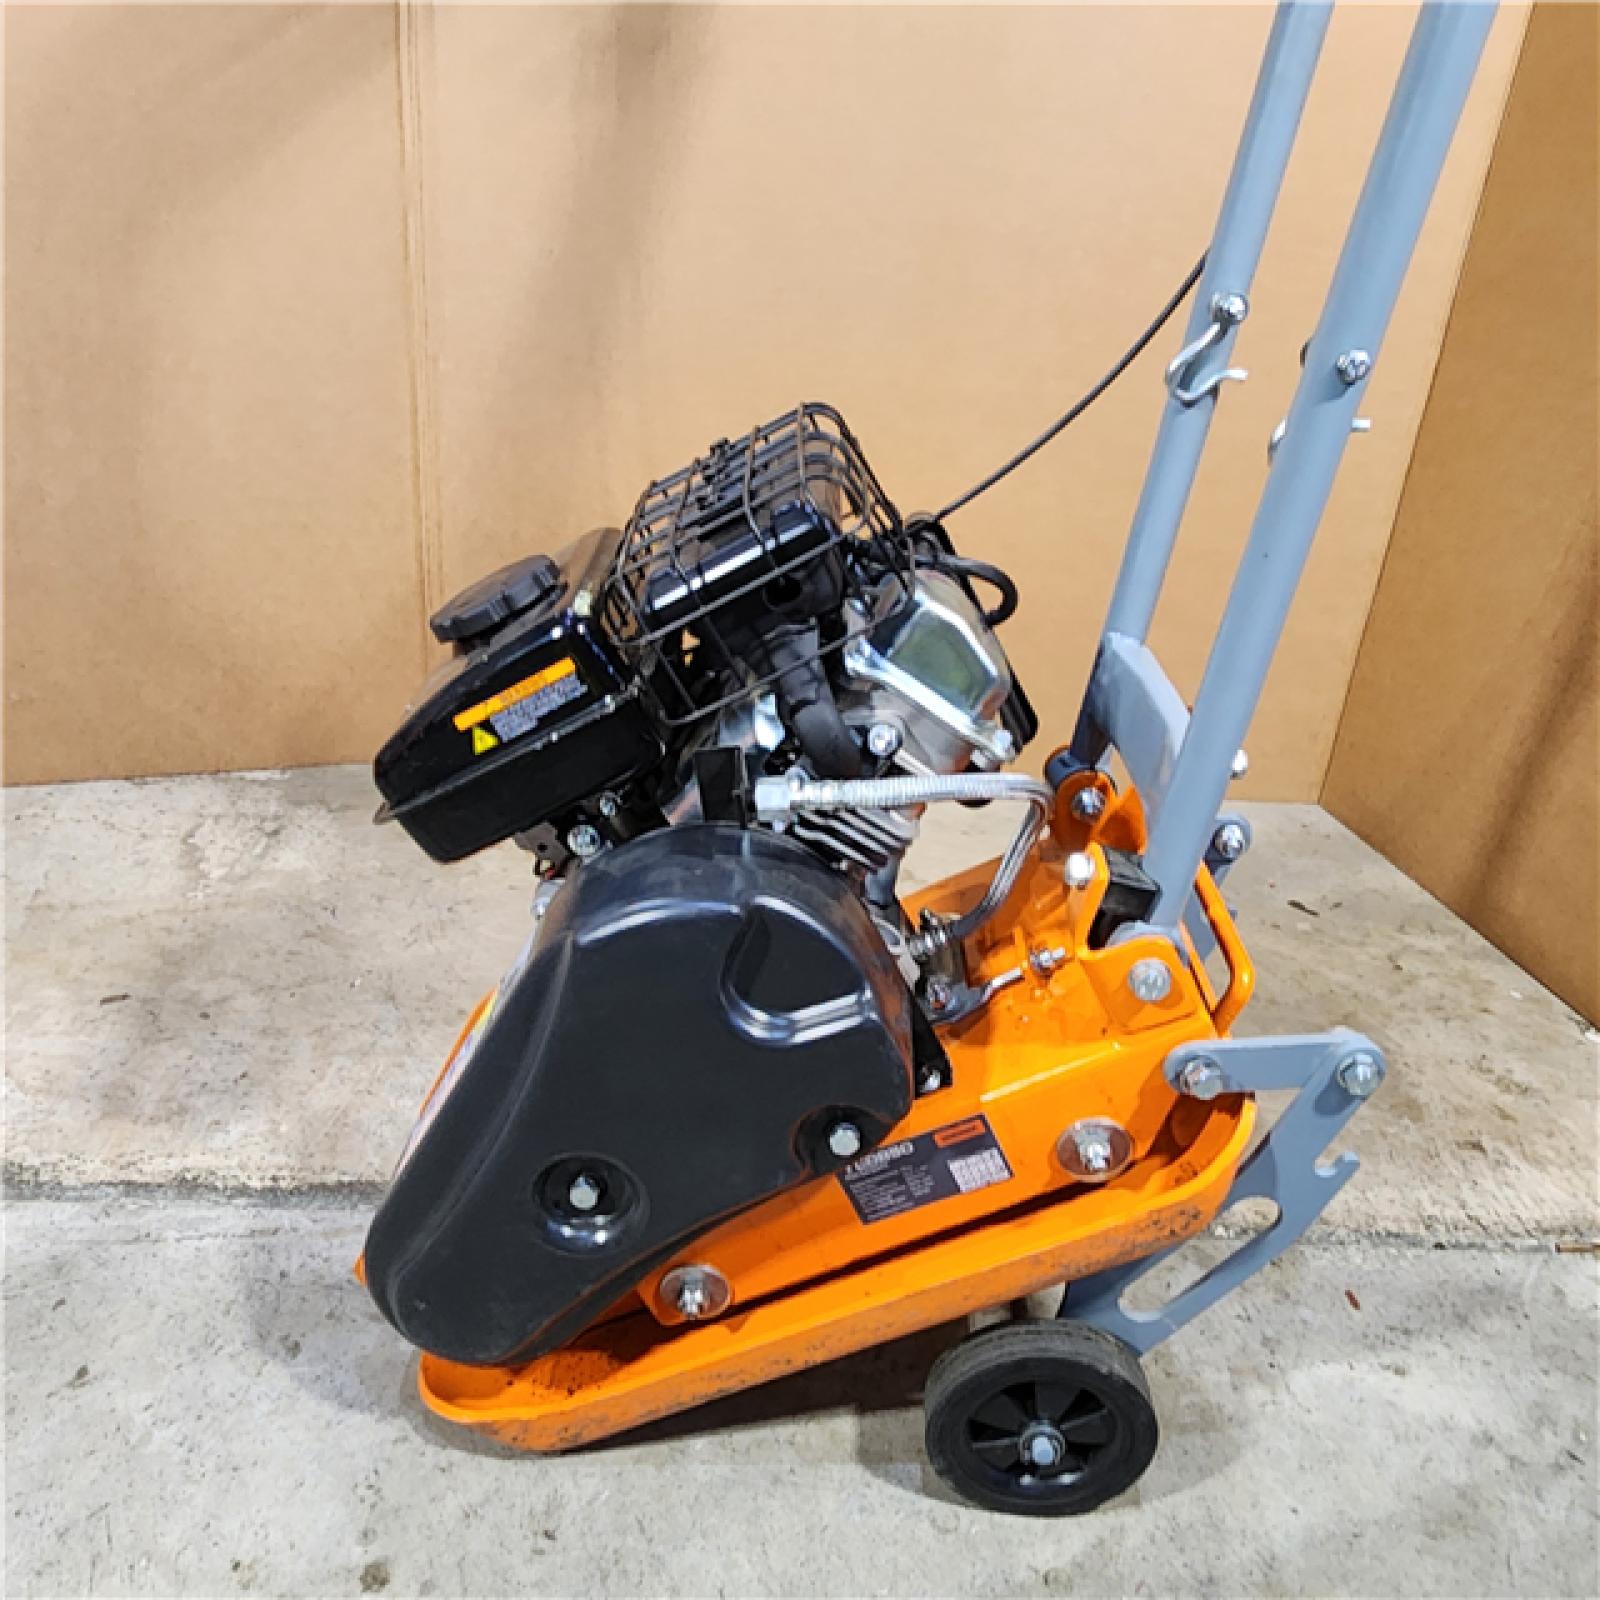 Houston location-AS-IS YARDMAX YC0850 1 850 Lb. Compaction Force Plate Compactor 2.5HP/79cc Recoil